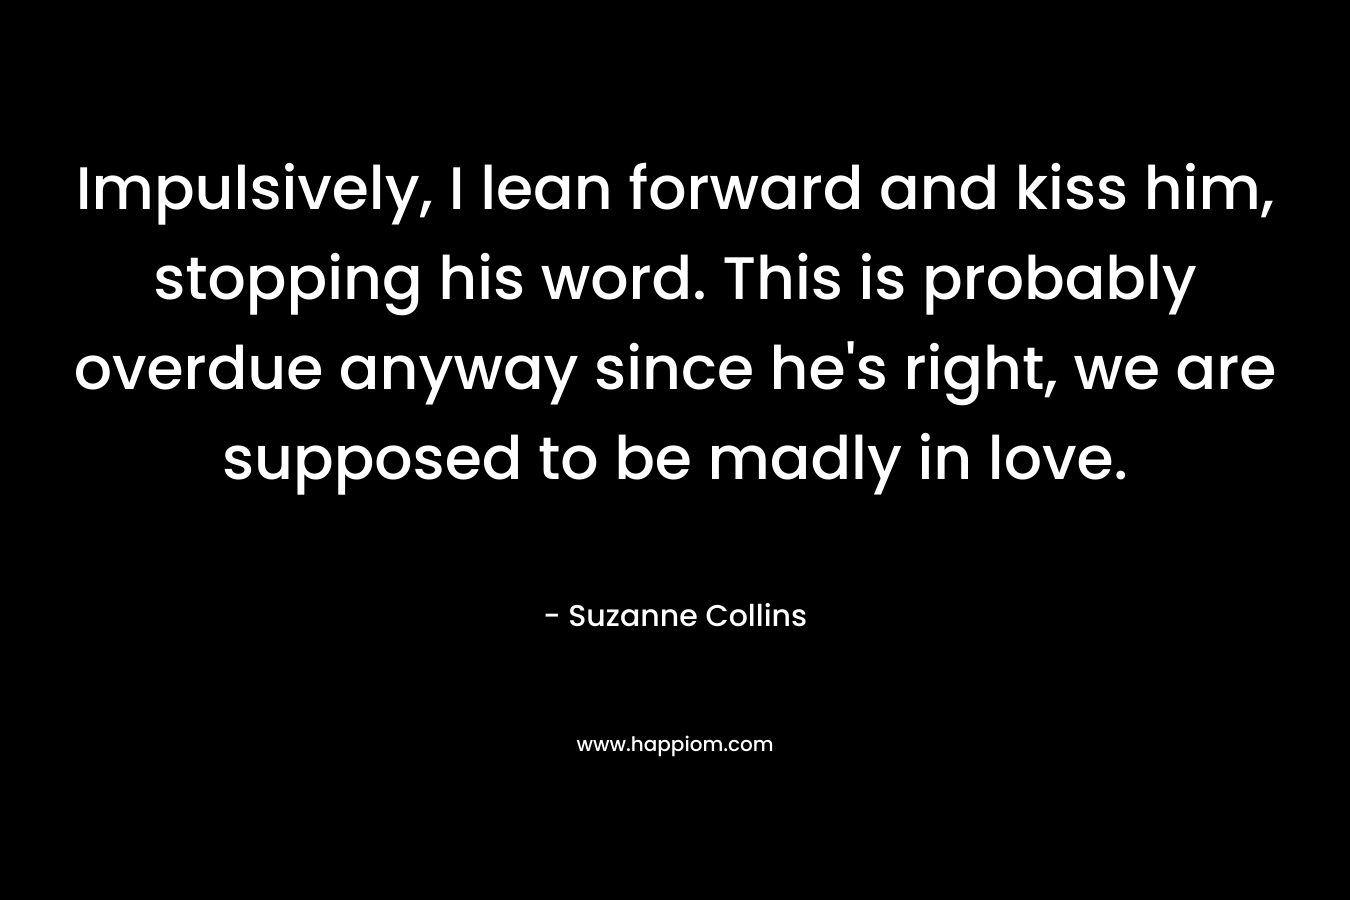 Impulsively, I lean forward and kiss him, stopping his word. This is probably overdue anyway since he's right, we are supposed to be madly in love.